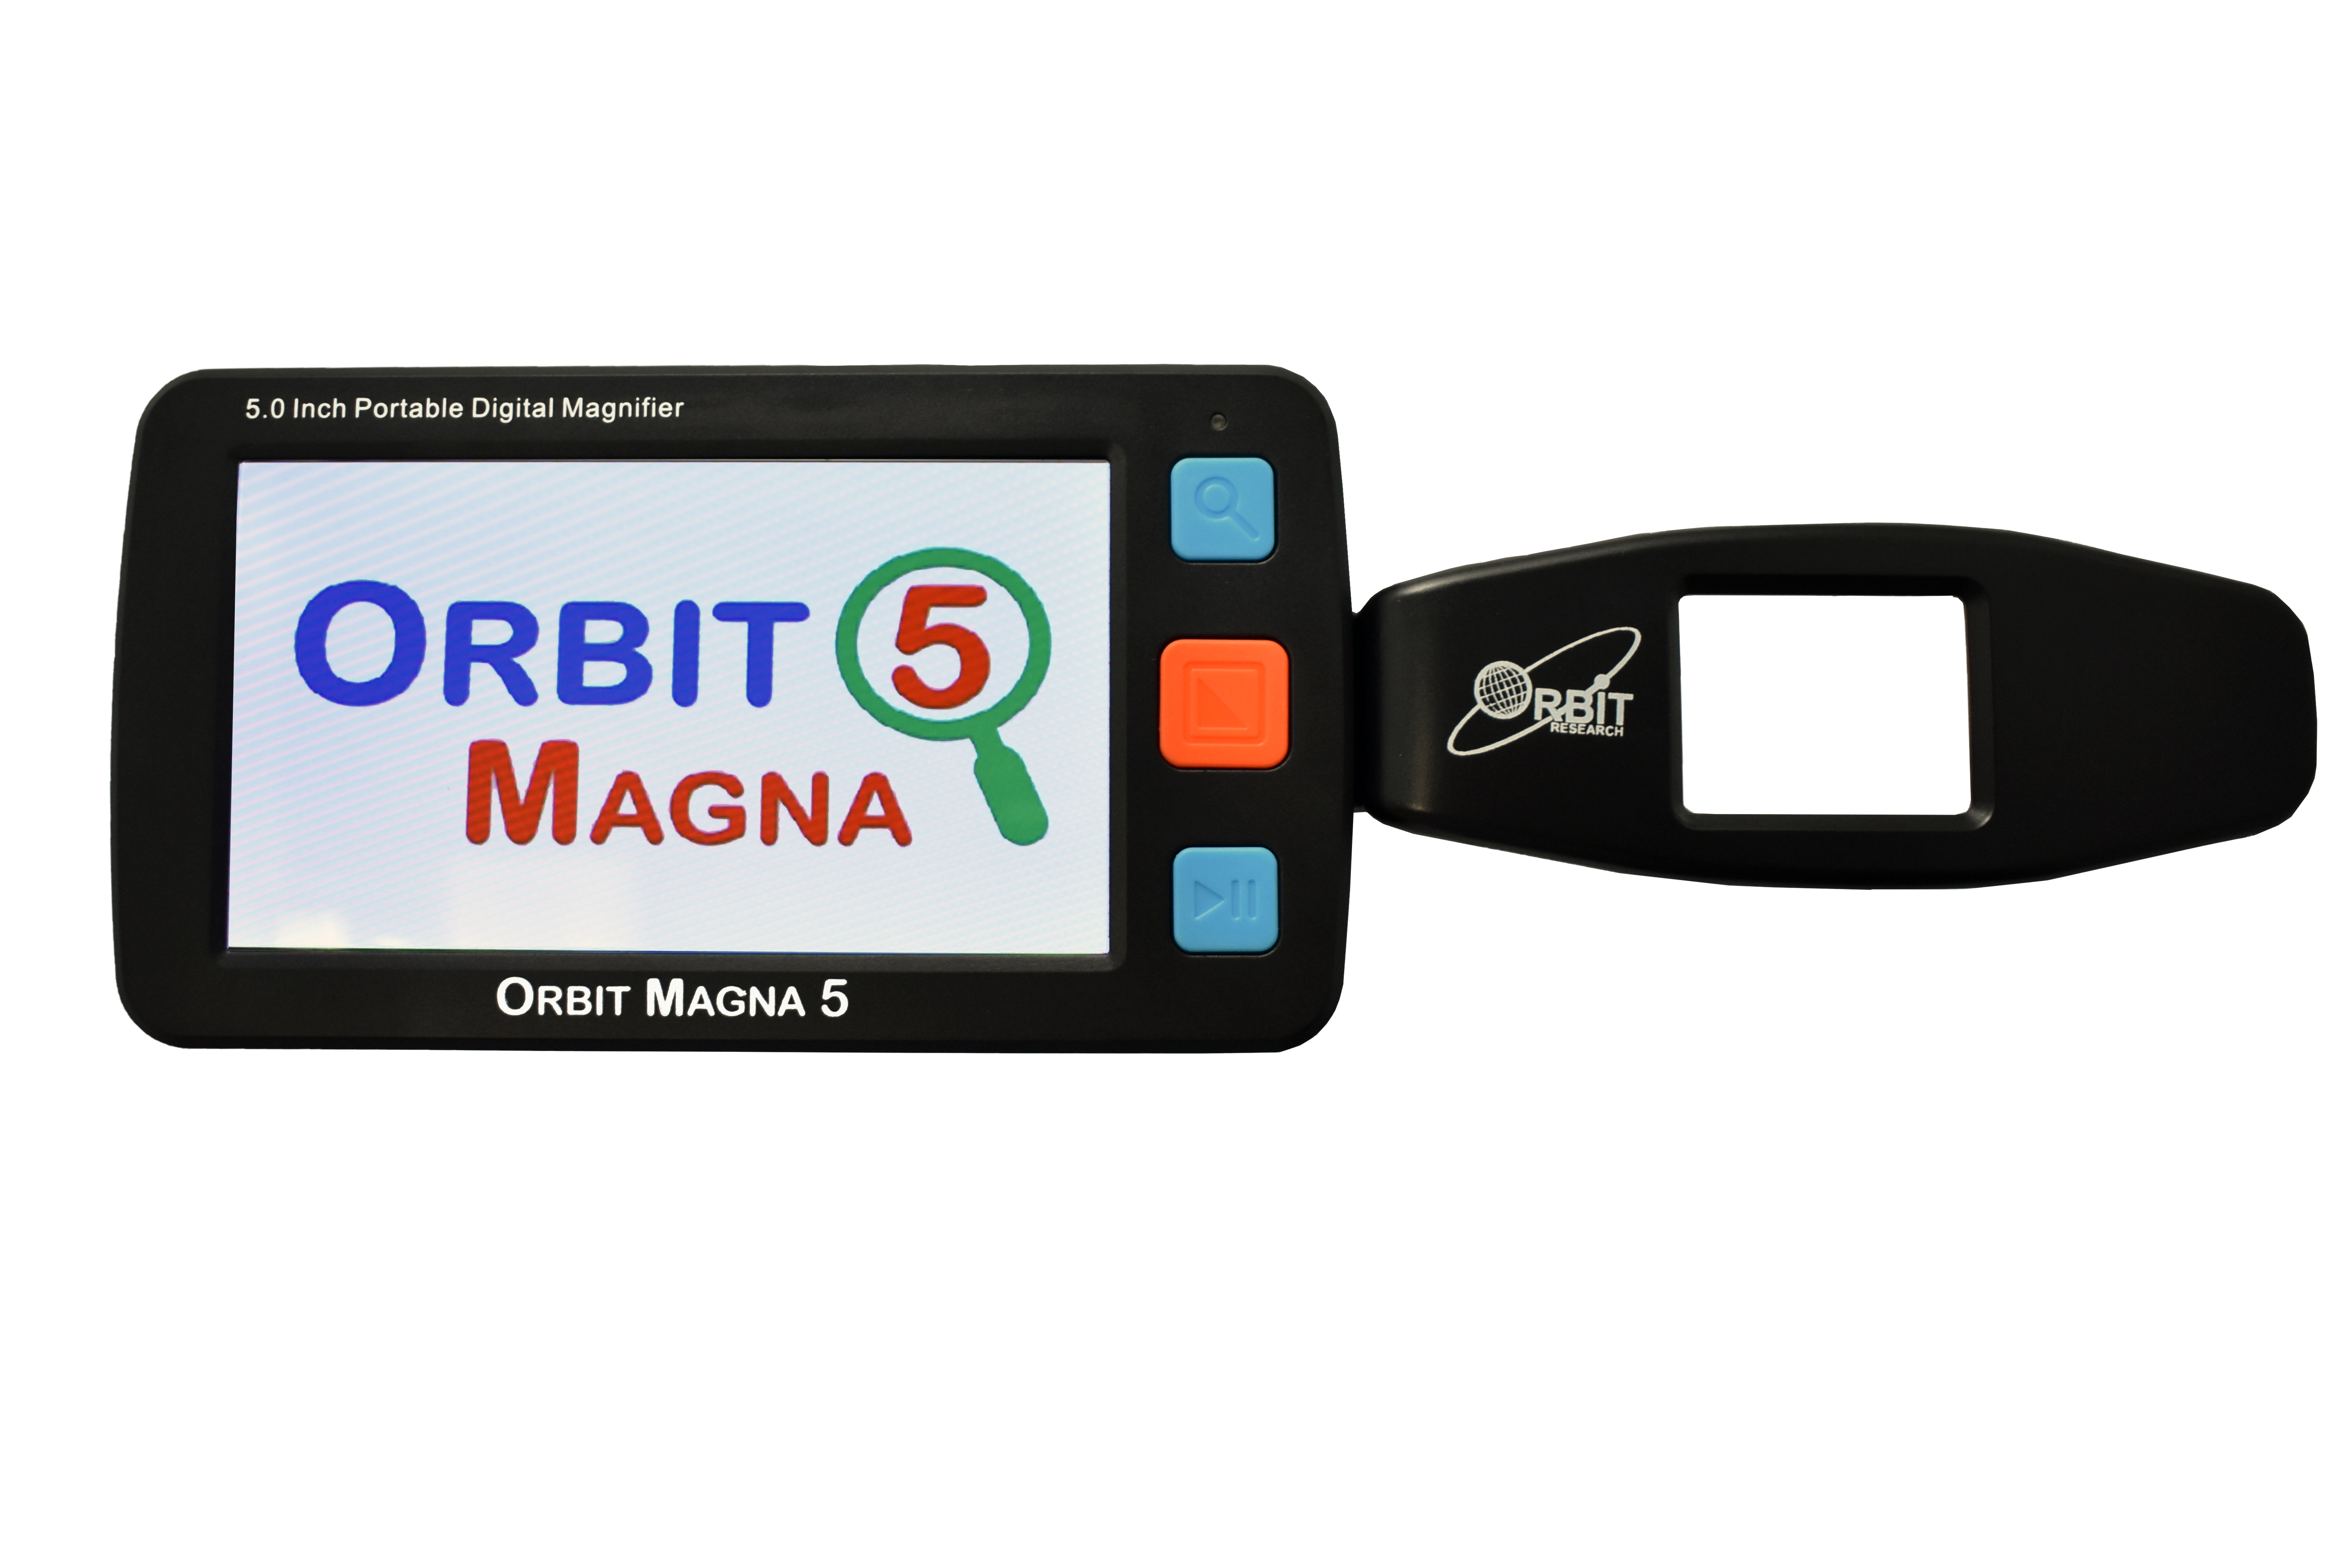 Orbit Magna 5 – Handheld Electronic Magnifier with handle